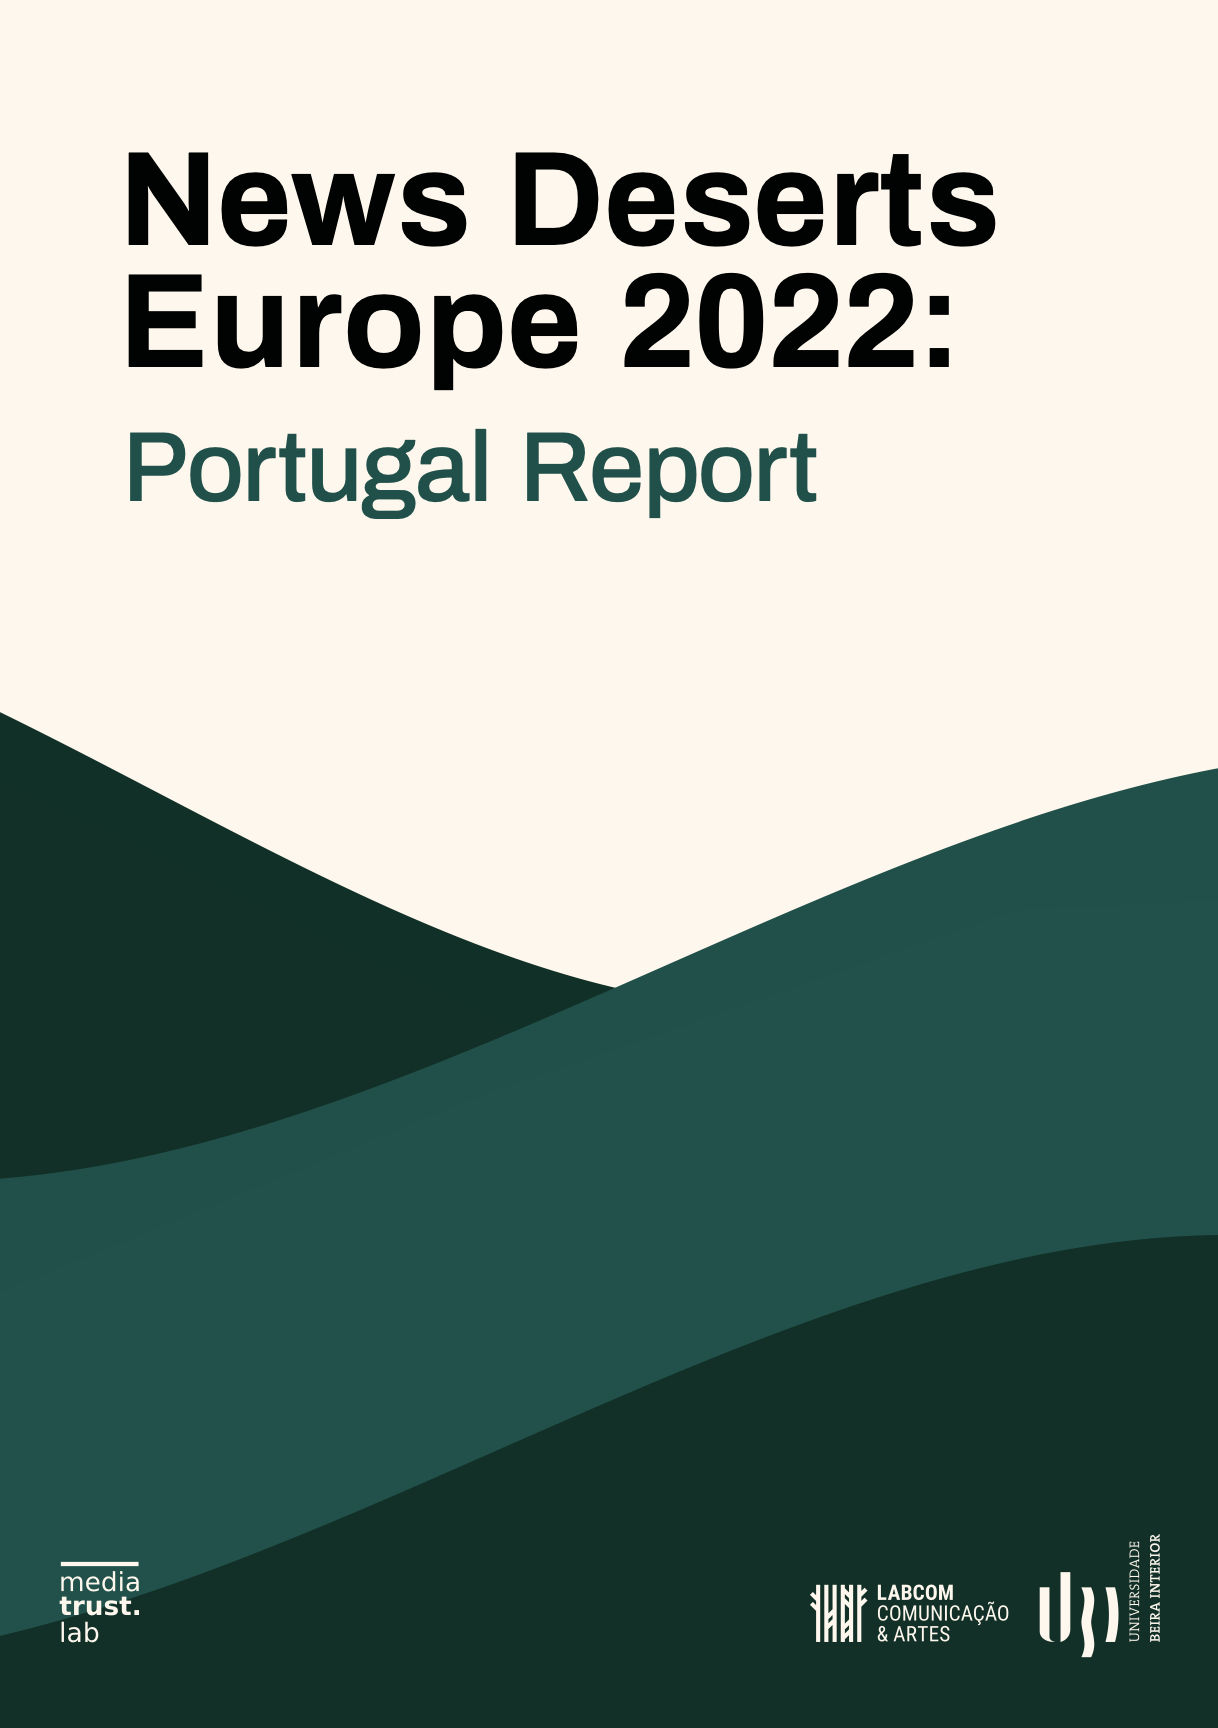 NEWS DESERTS EUROPE 2022: PORTUGAL REPORT